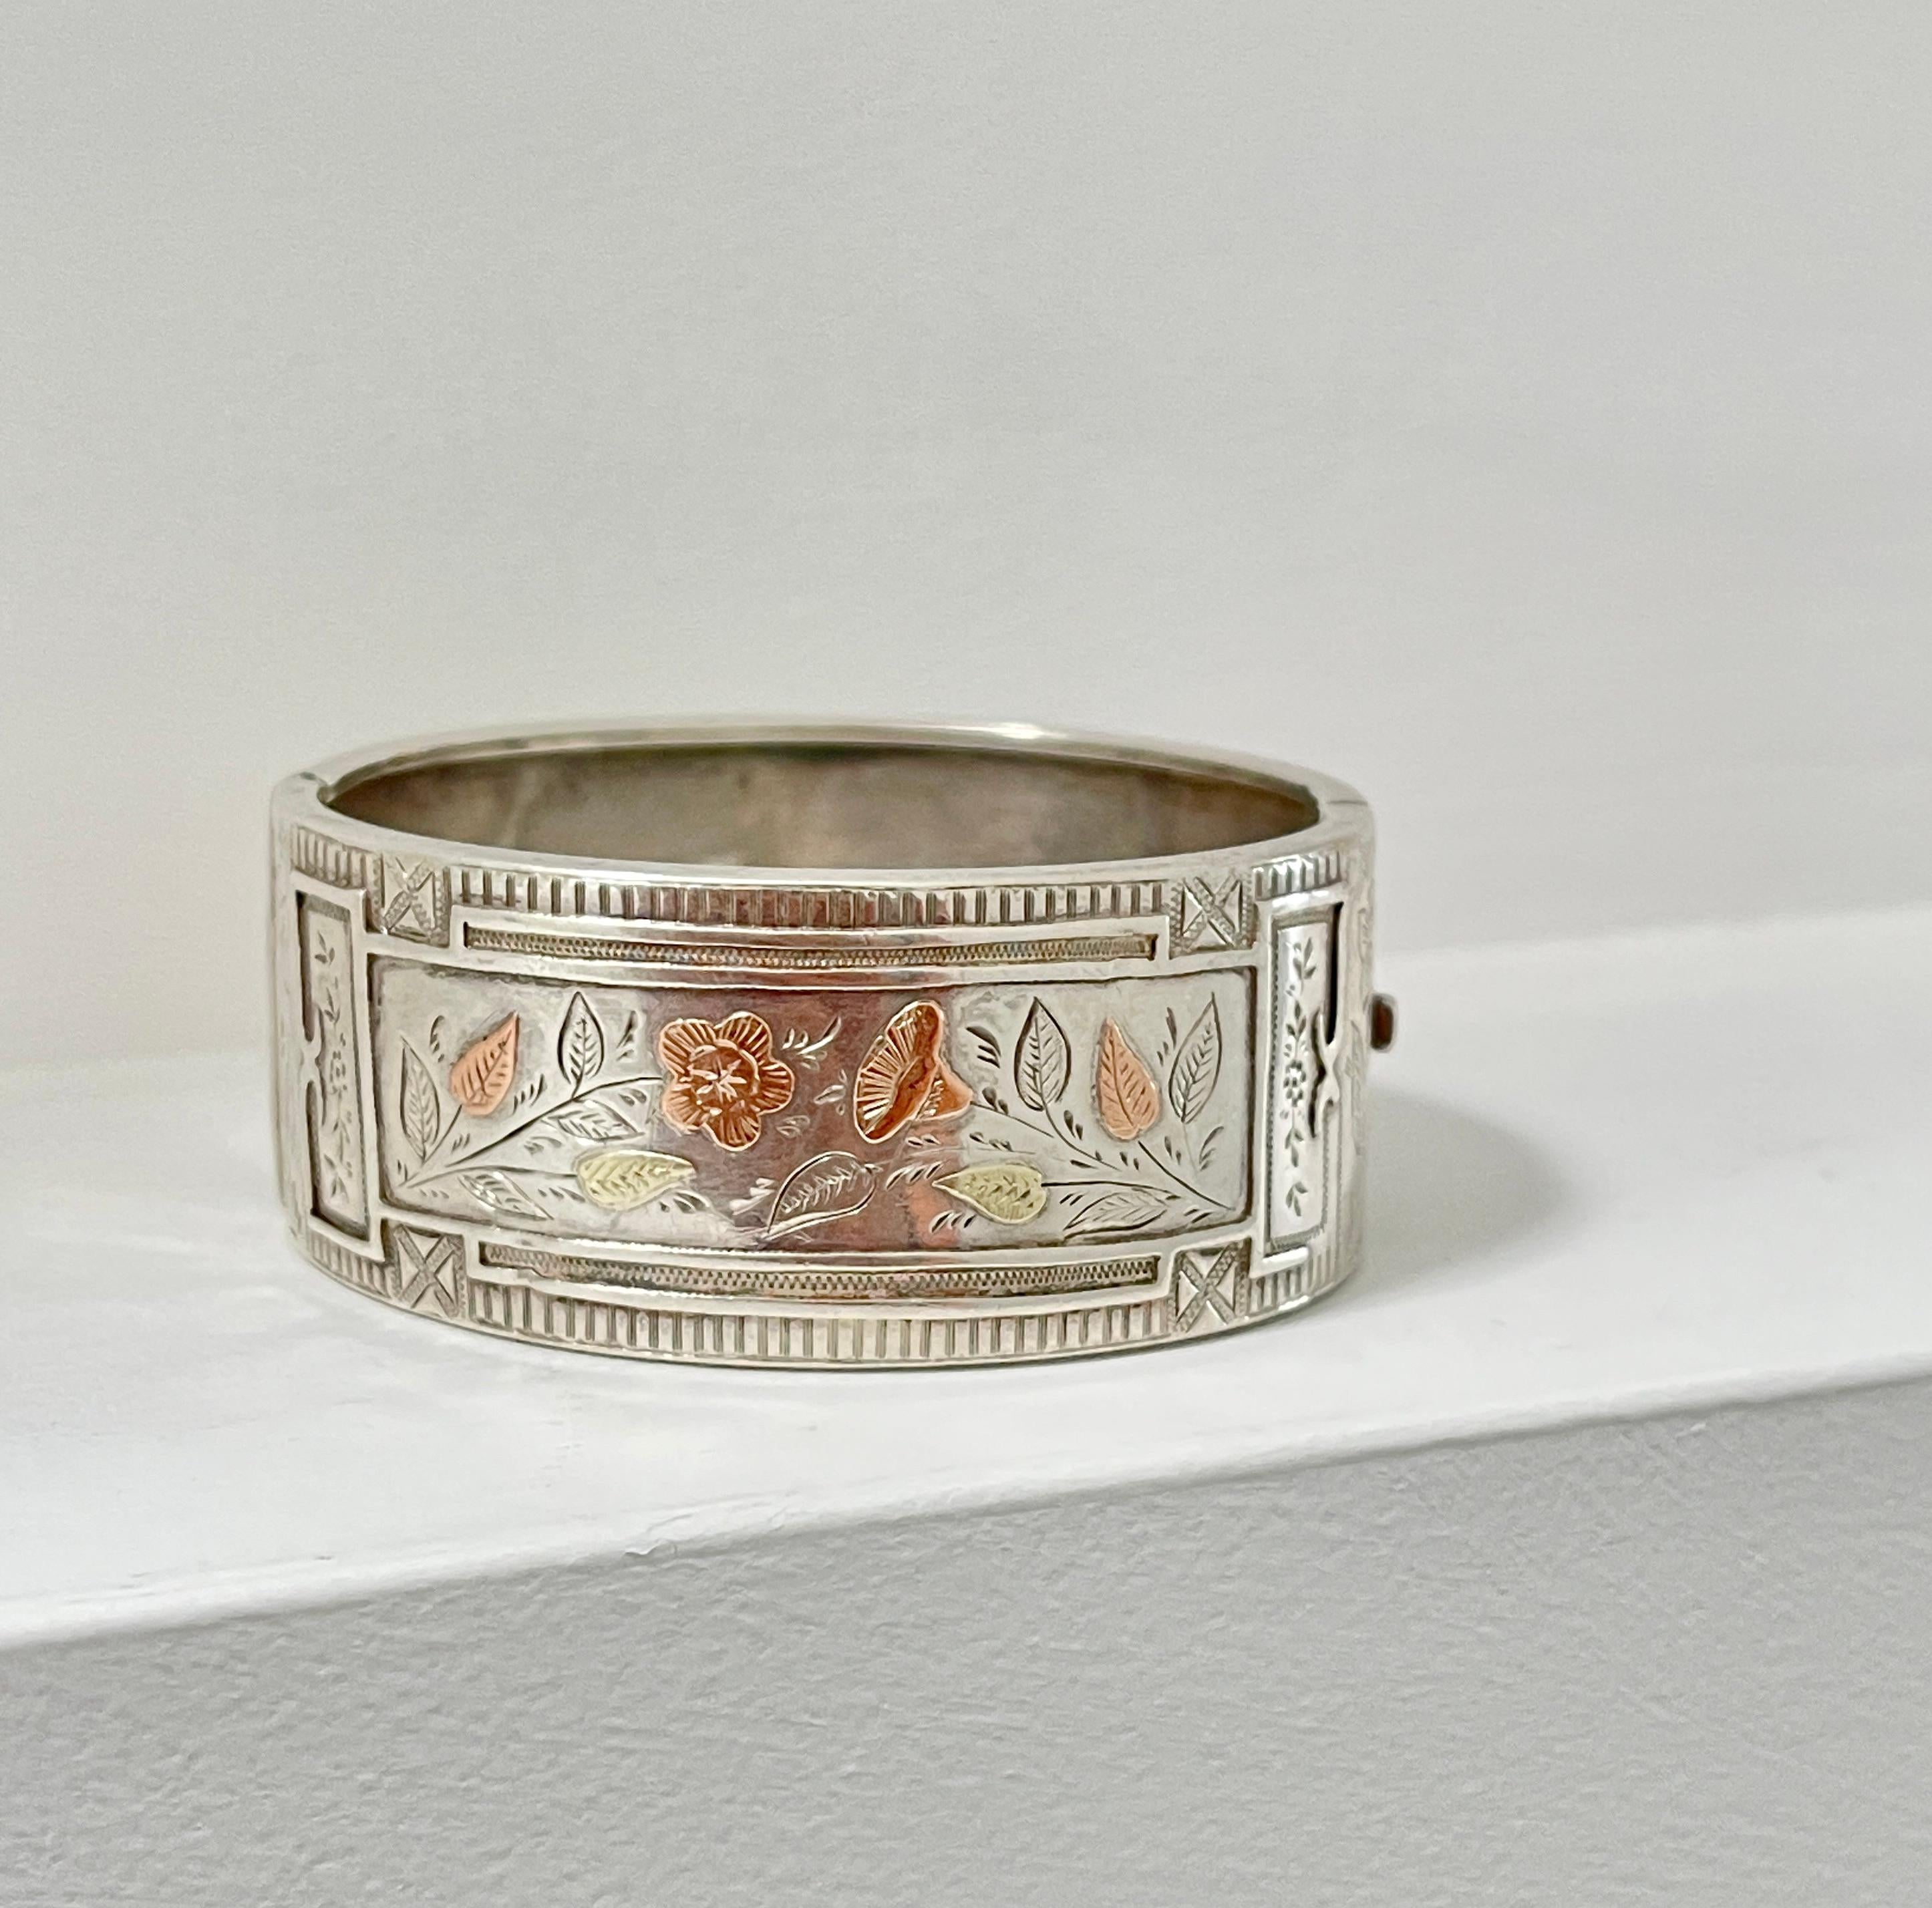 This beautiful Victorian bangle is 140 years old!

It is solid sterling silver and features a hand engraved flower and leaf design inlayed in yellow and rose gold.  The bangle was made in Birmingham in 1884 and bears these hallmarks plus the makers